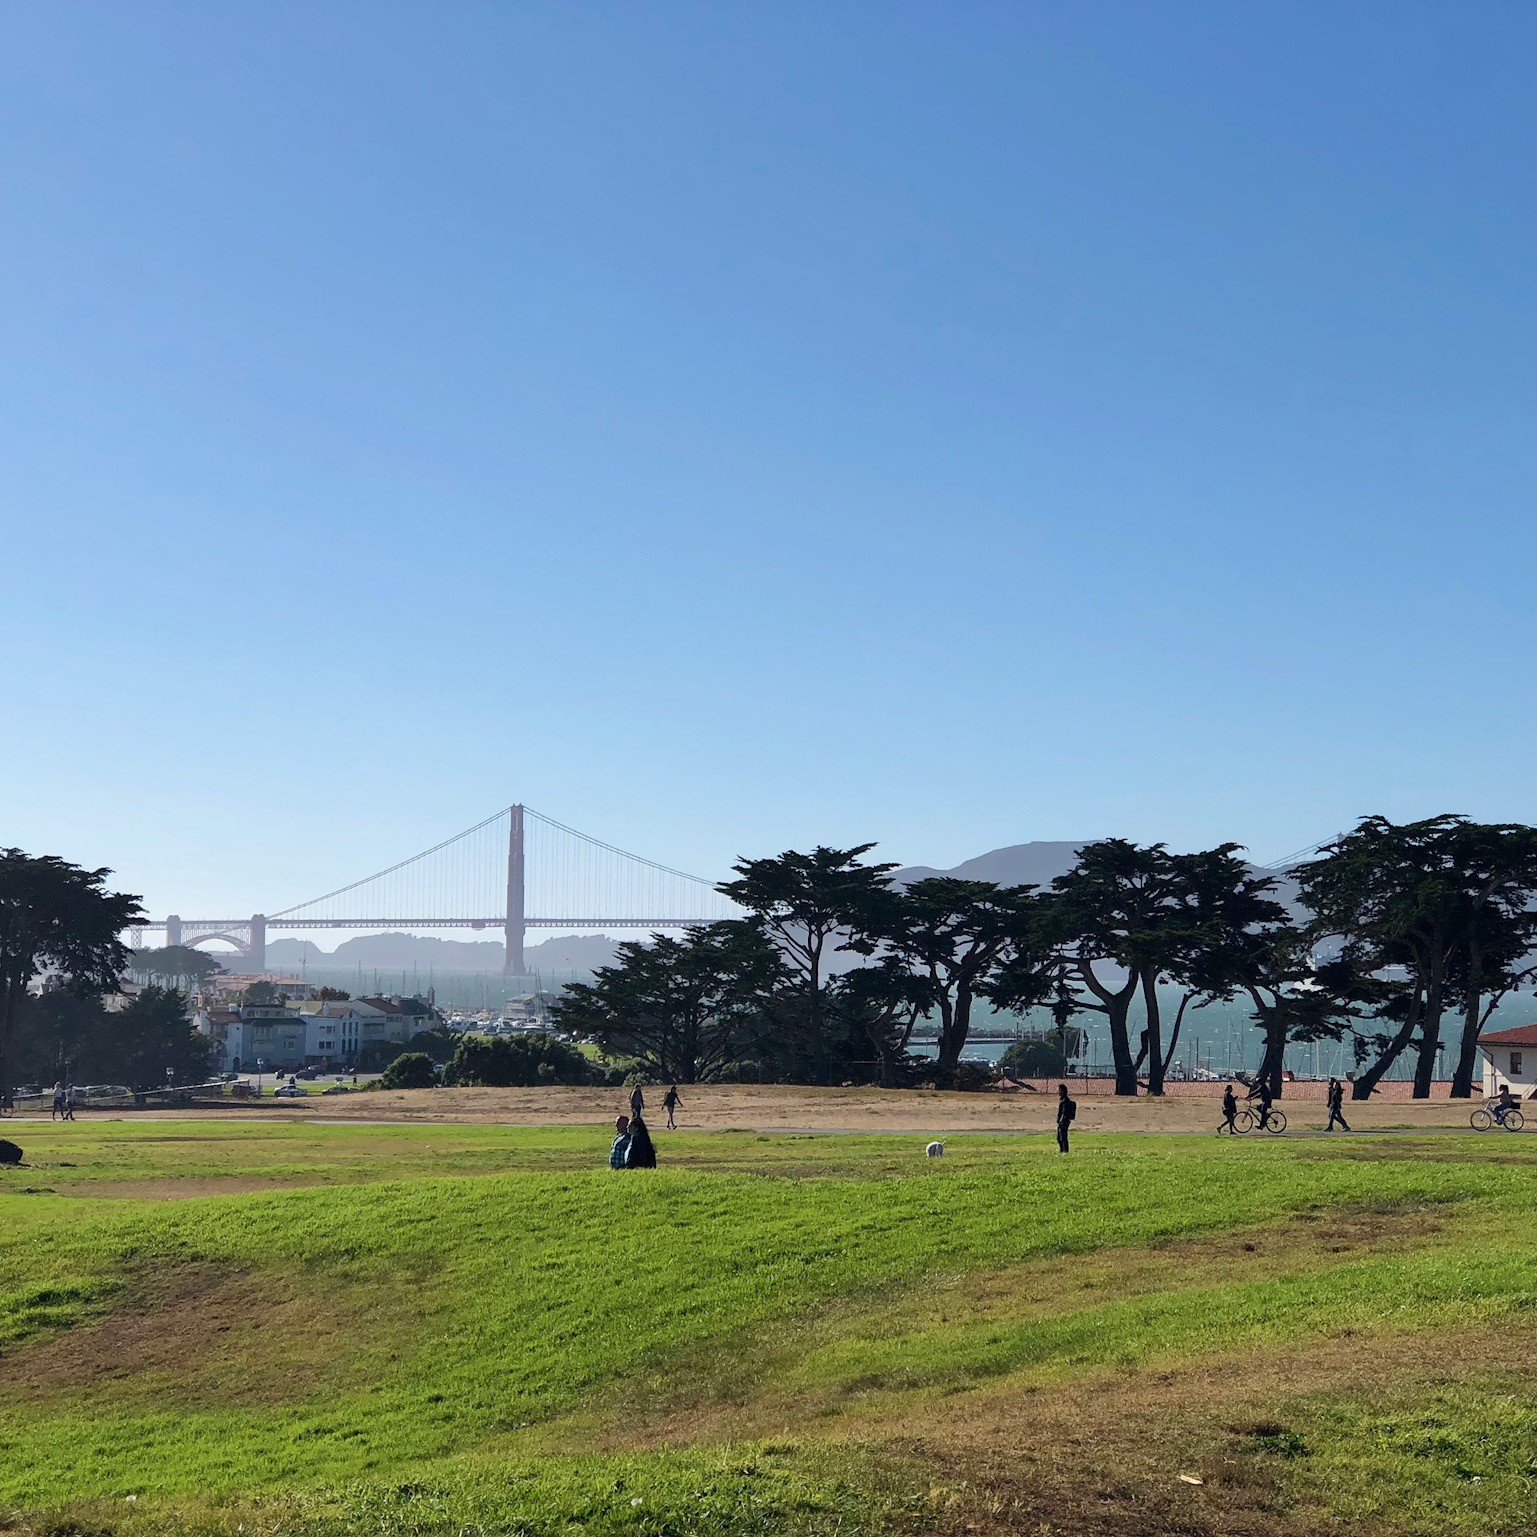 Picture of Marina green looking over the grass towards the bay with the Golden Gate Bridge in the background